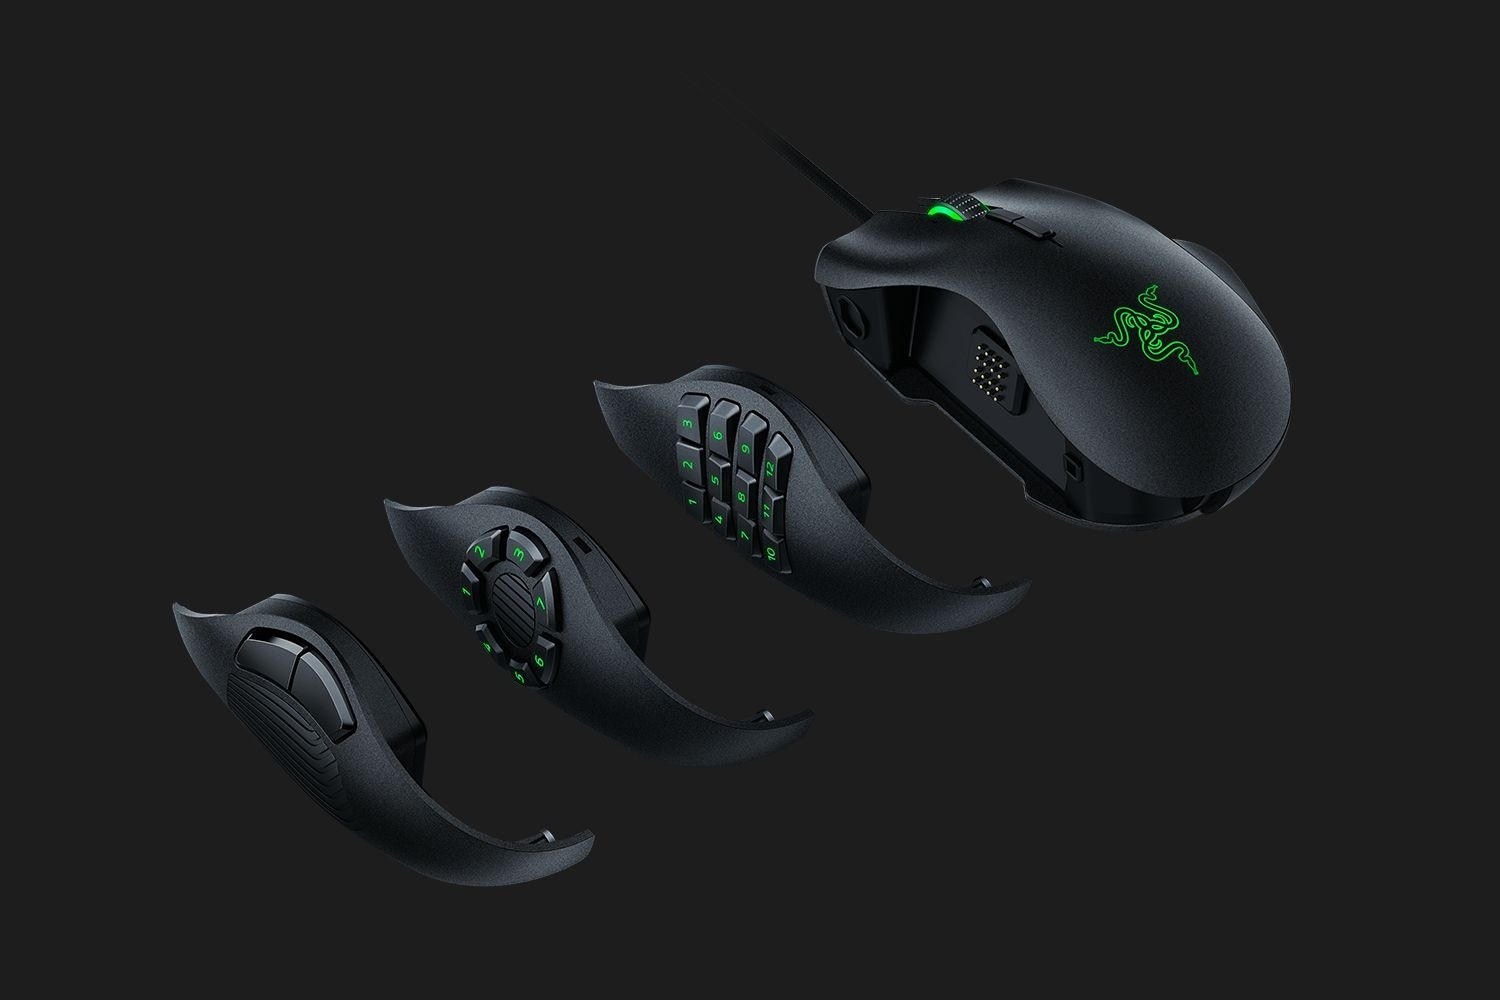 How Do You Keybind On A Gaming Mouse In WoW?